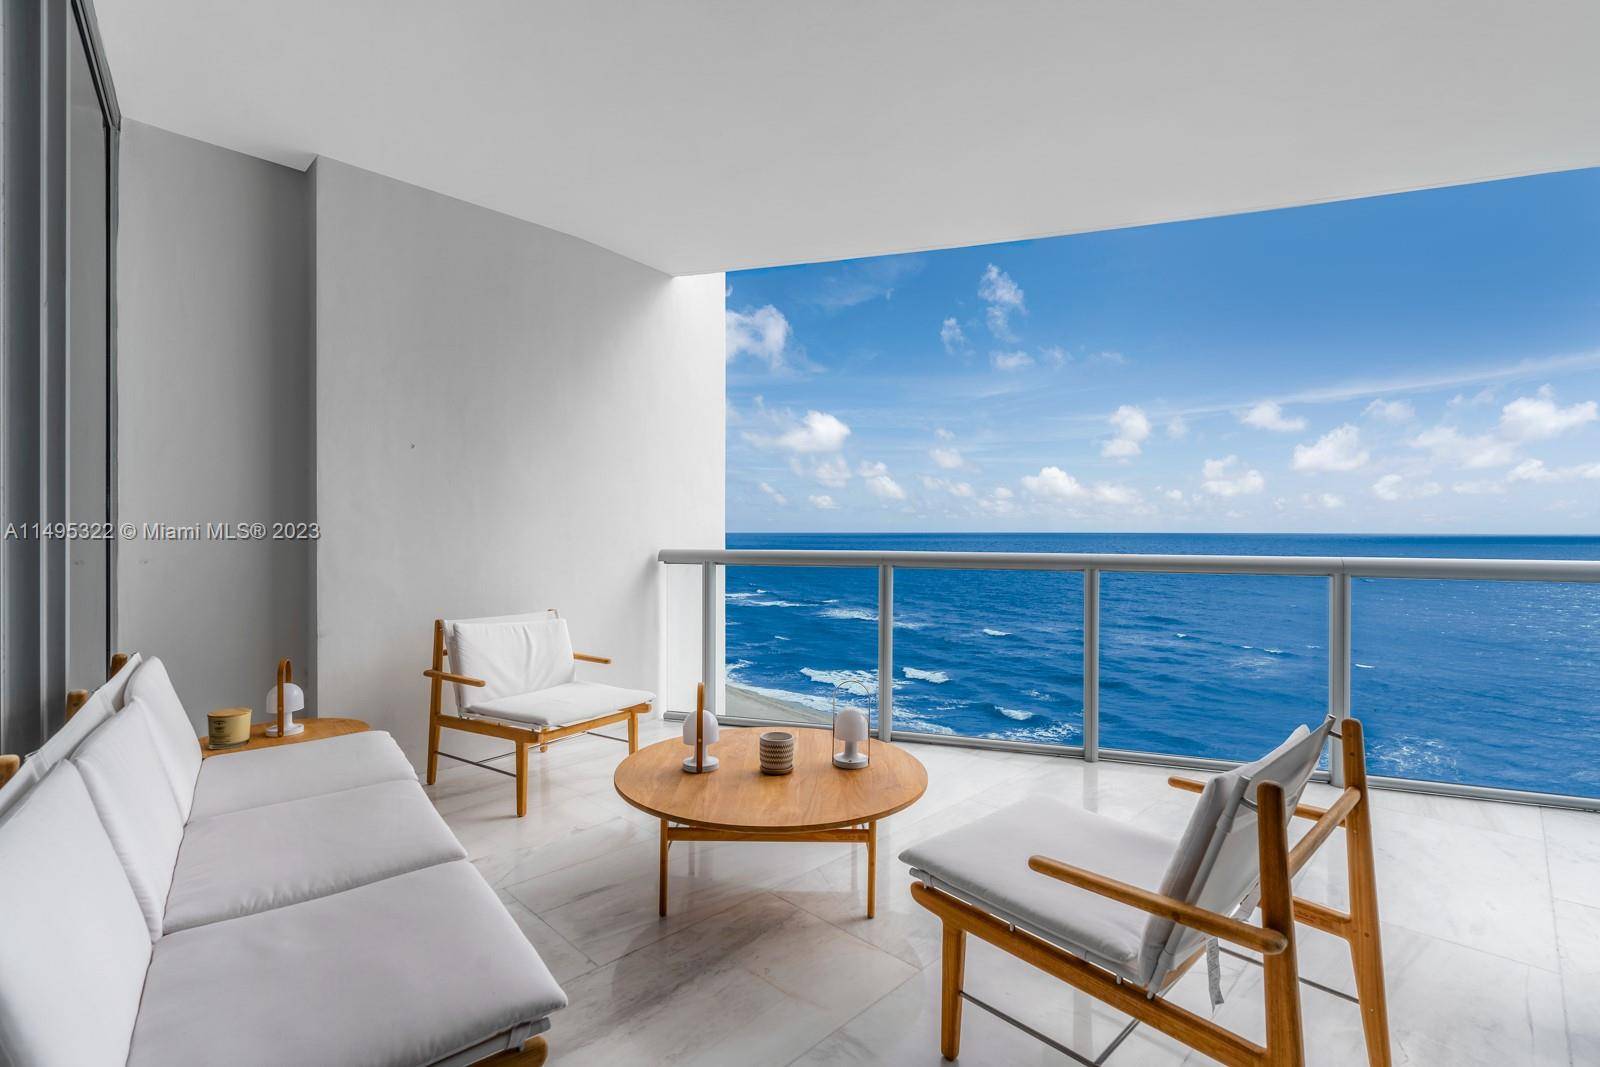 Magnificently newly renovated 3BR 3BTH residence at Jade Ocean.